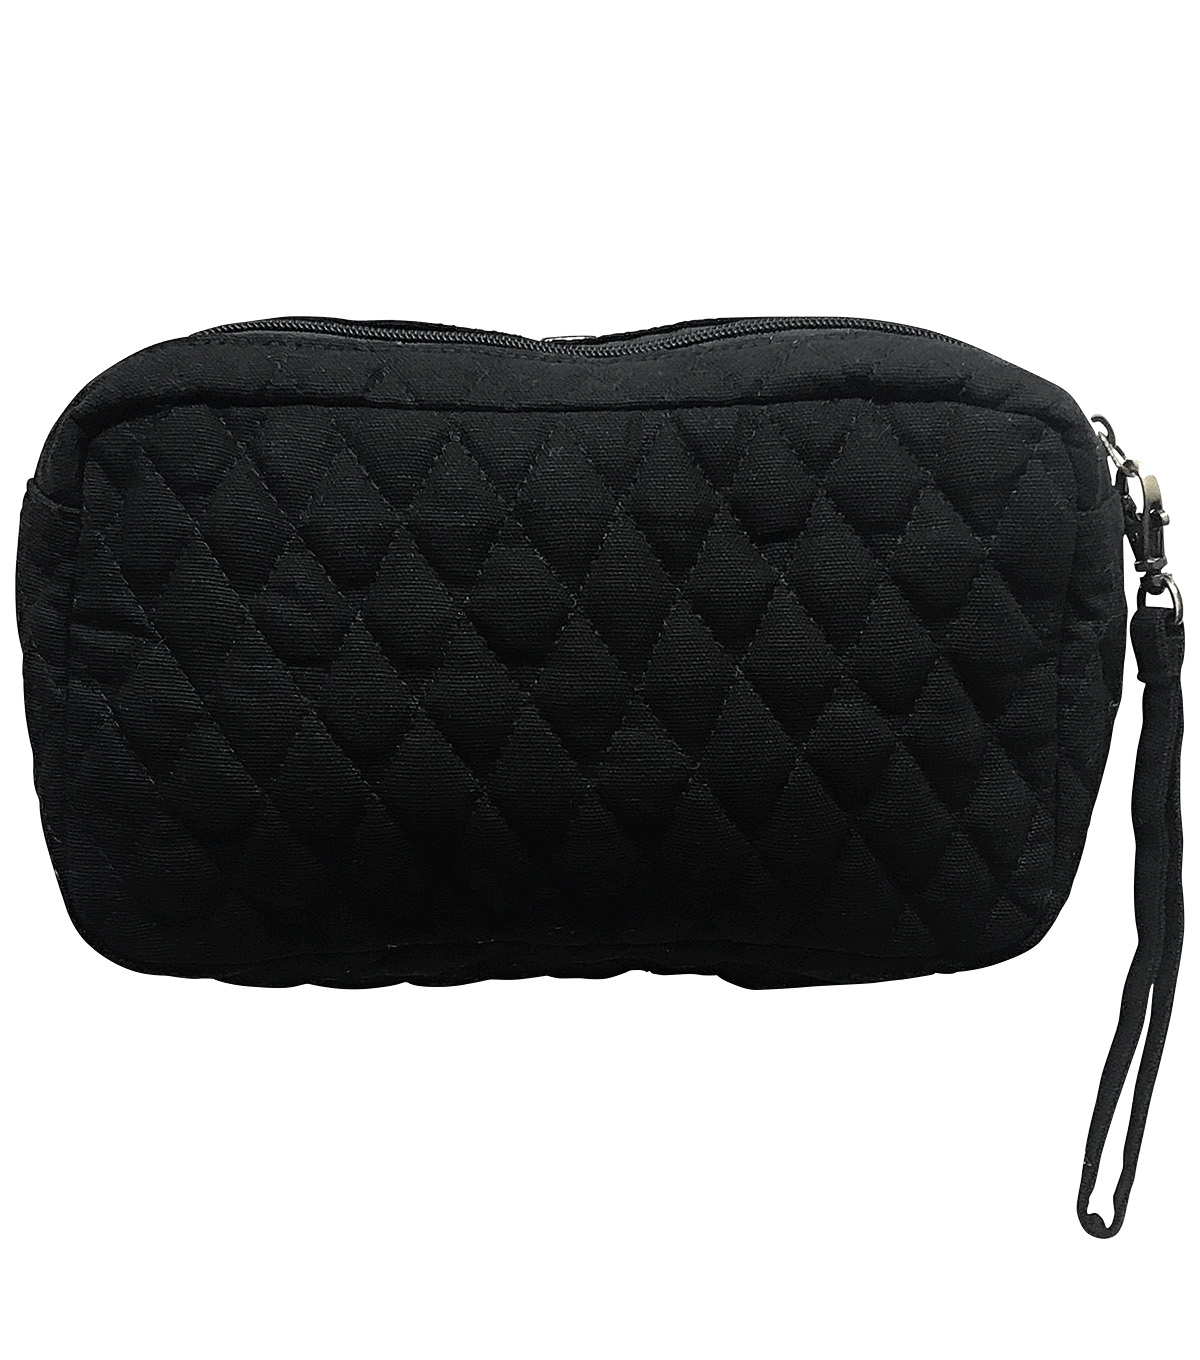 Black Canvas Cosmetic Bag With Gold Foil Logo & Zippered Closure